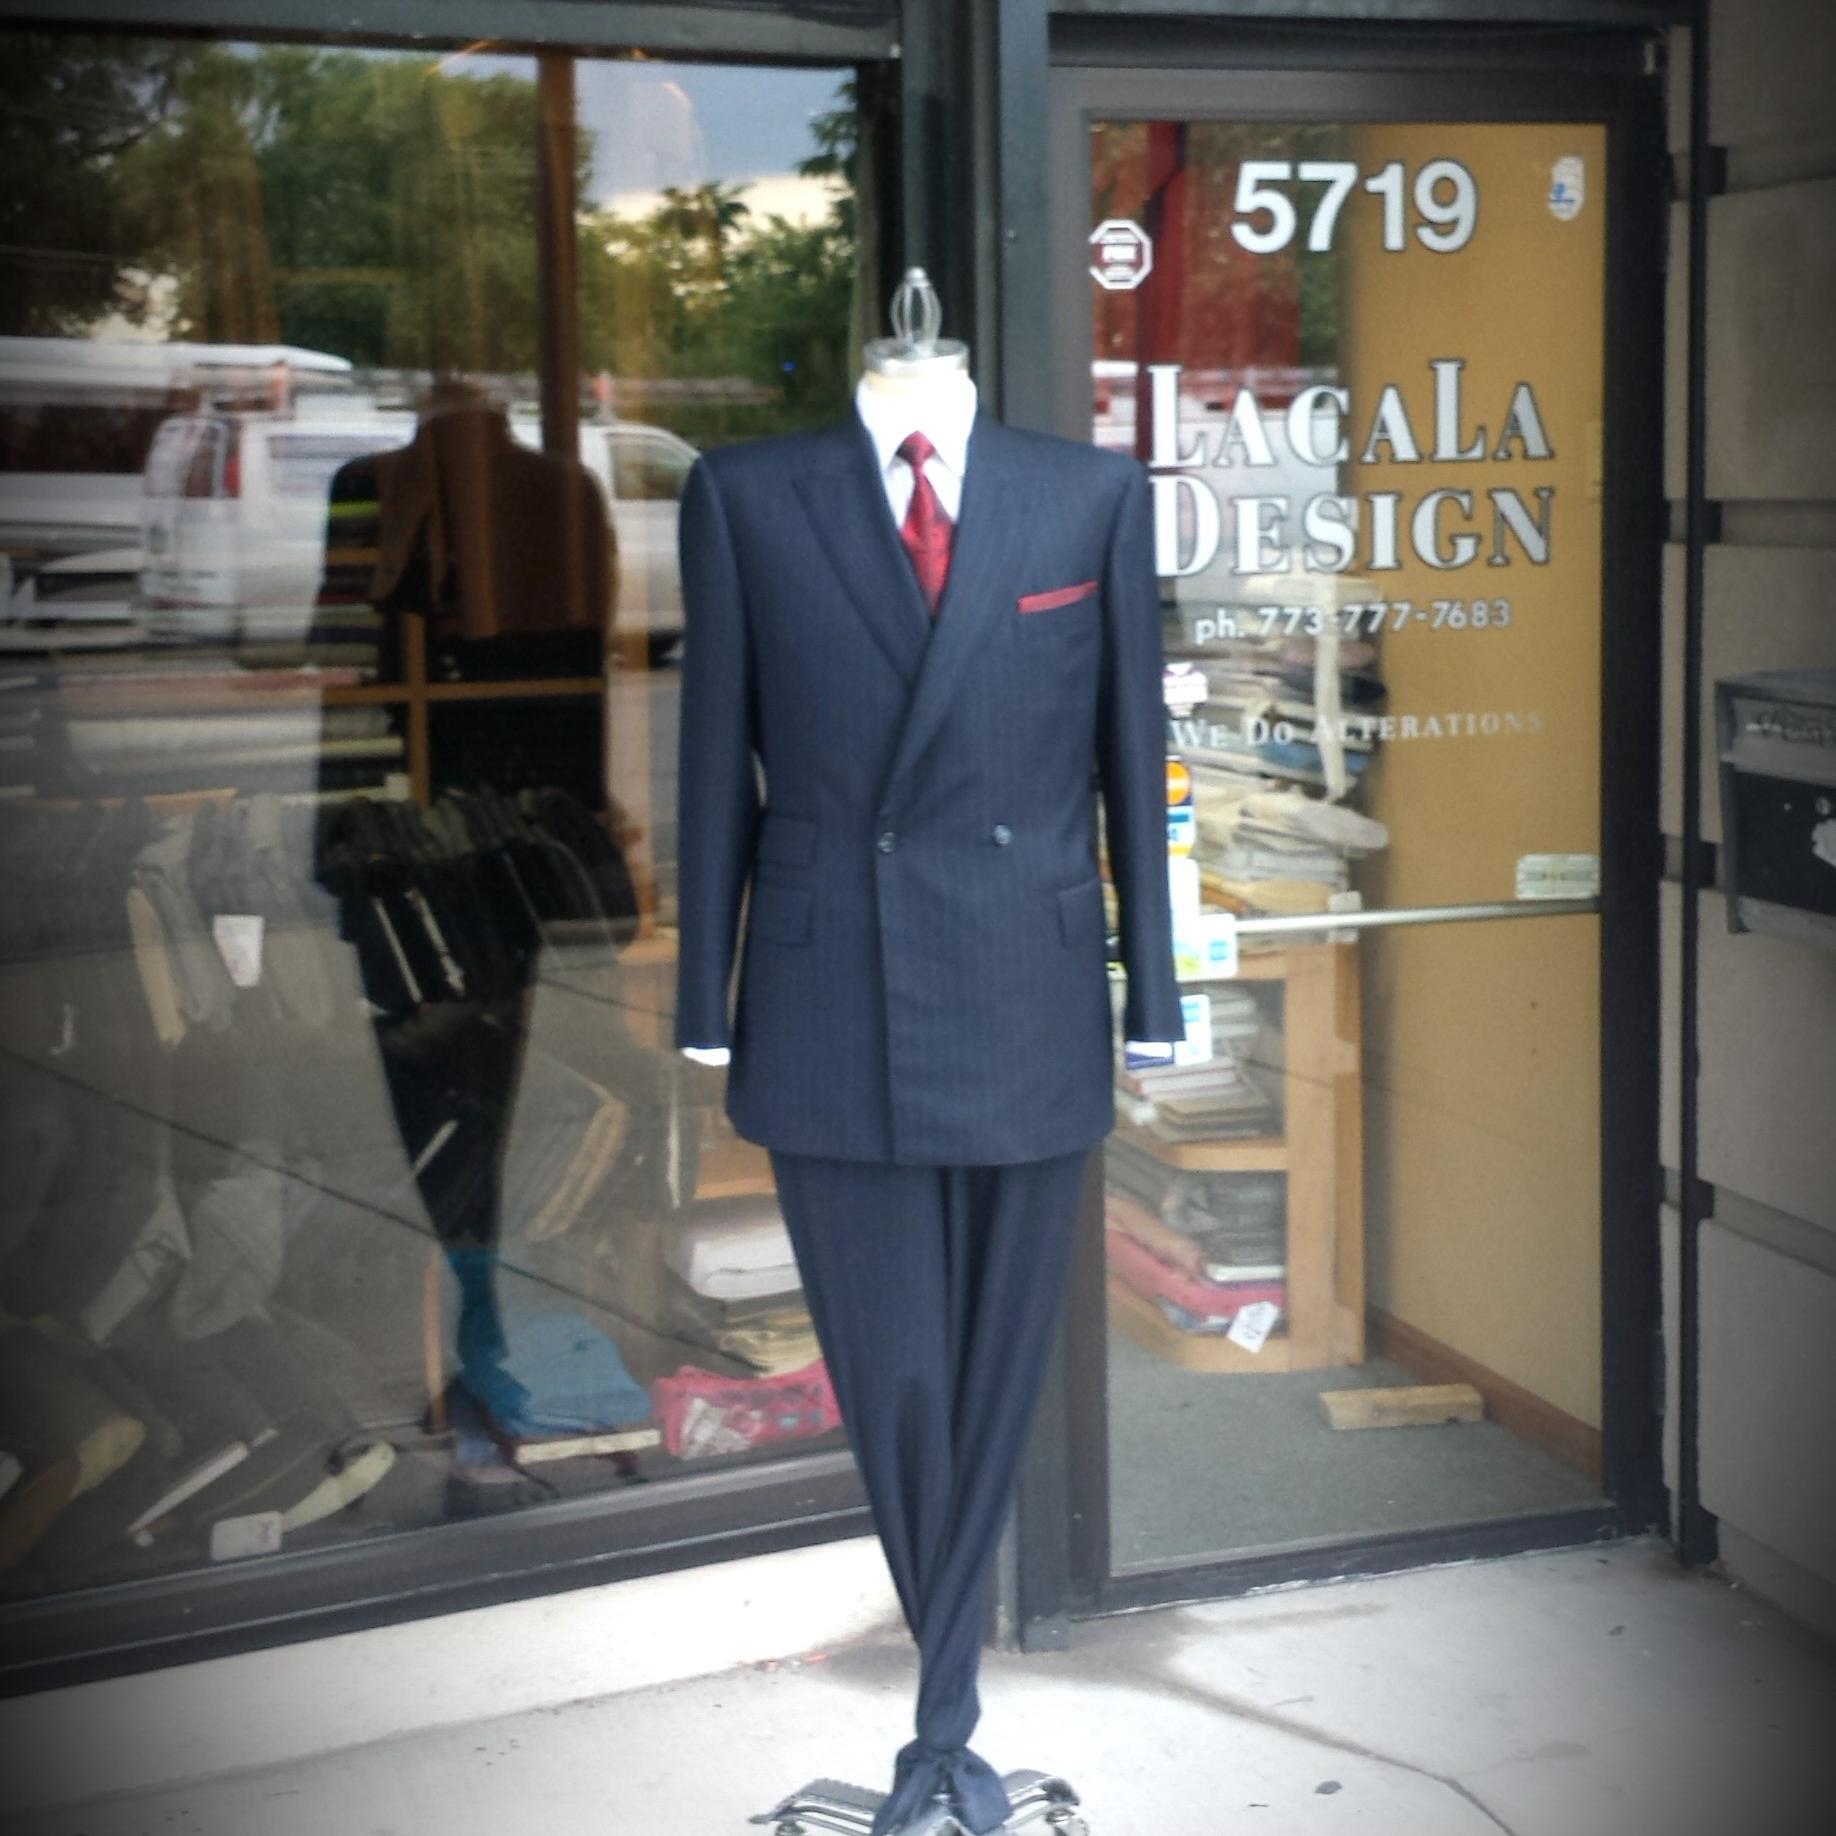 Custom Tailoring for those who indulge in Bespoke Tailoring,Custom Fashion Designer Suits & Dresses, PROM Specials, Fur & Leather Jackets, Pants, Shirts, etc...